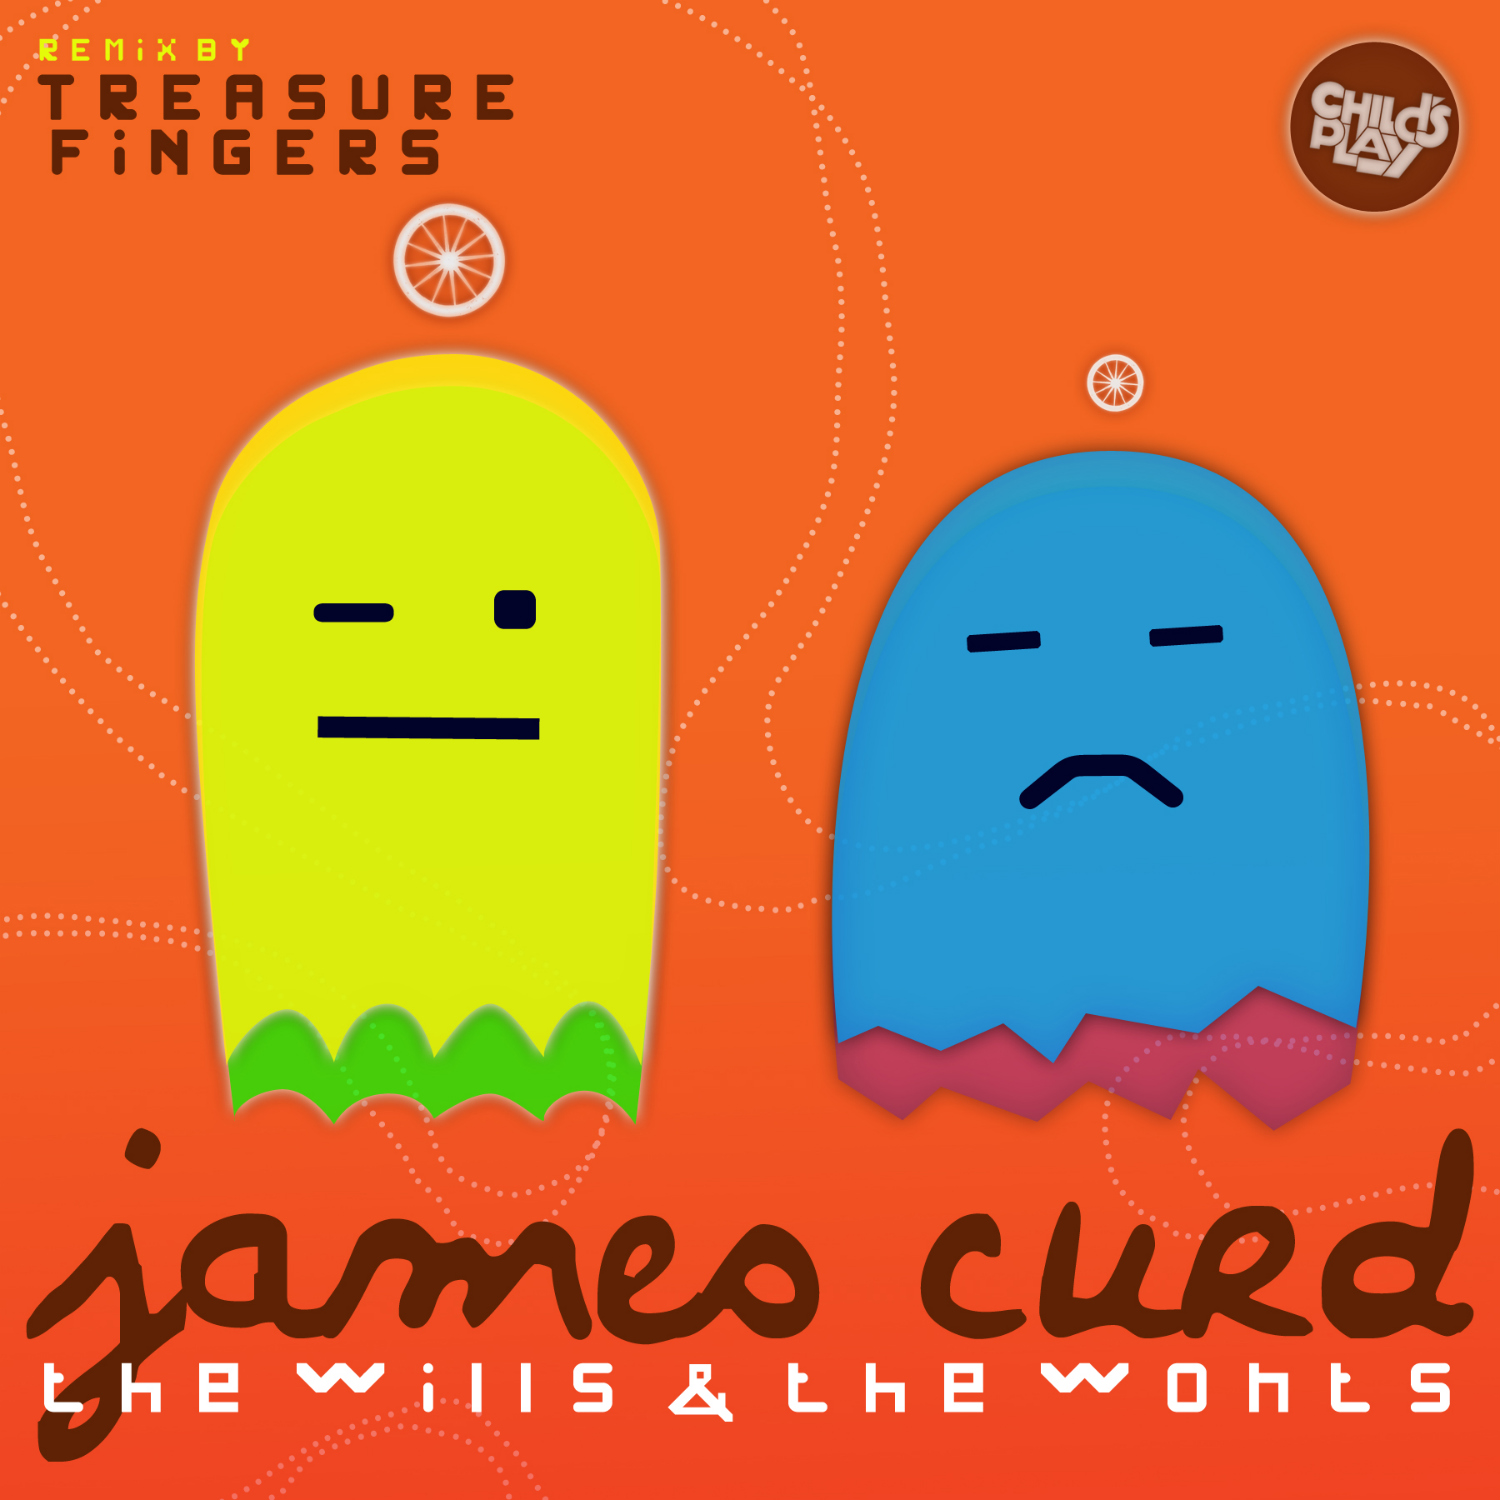 James Curd - The Wills & The Wonts